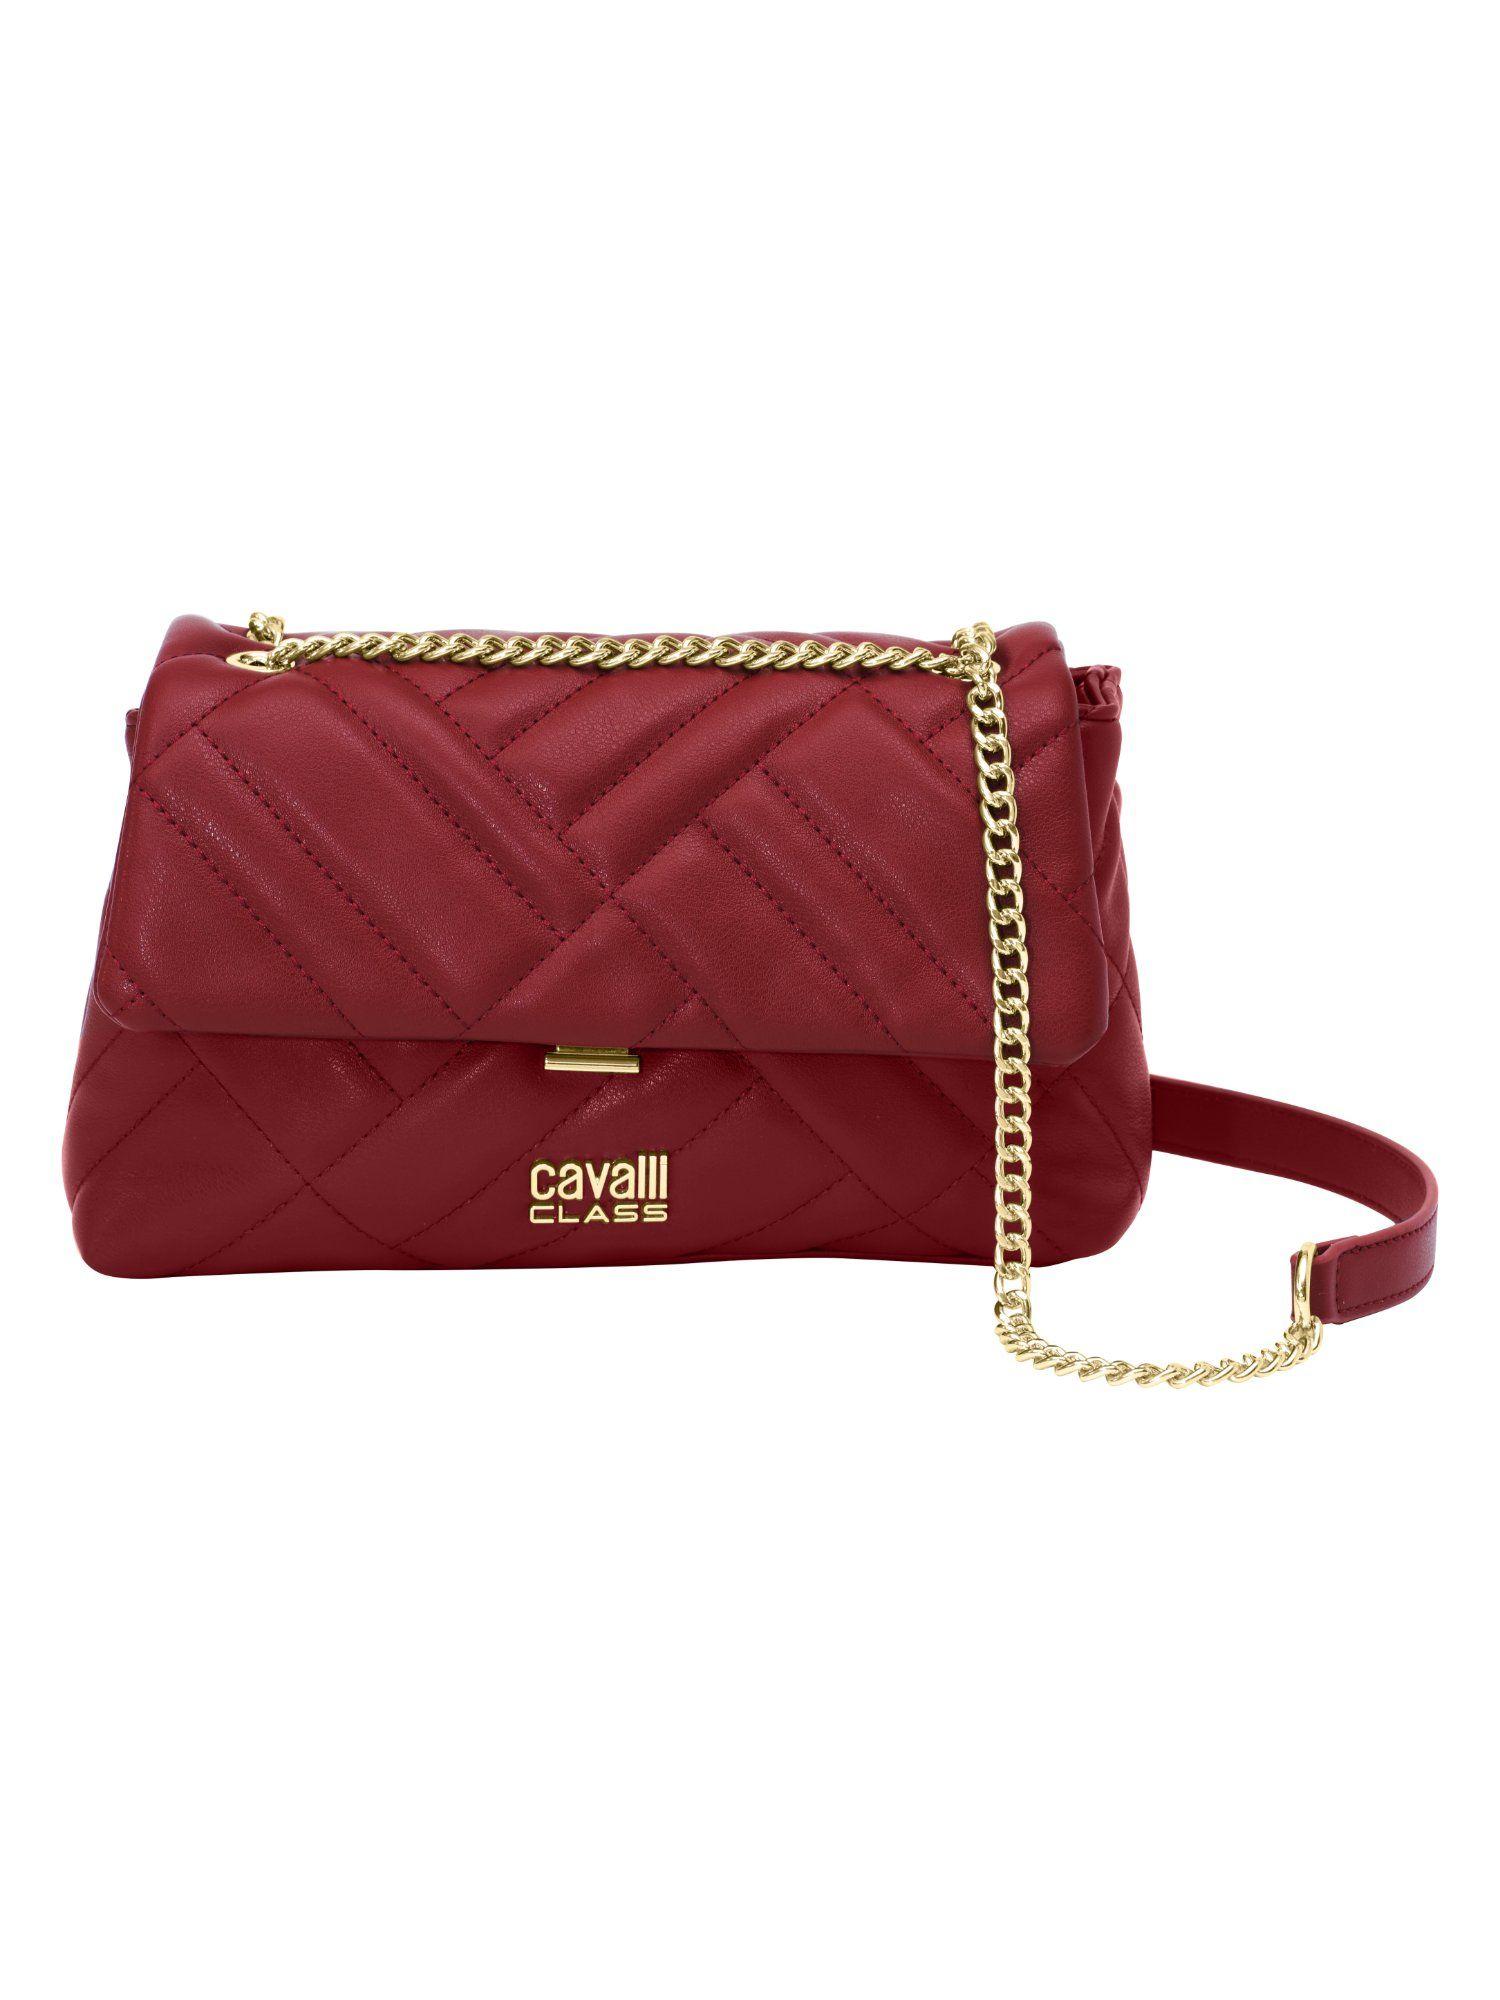 patty synthetic leather red sling bag